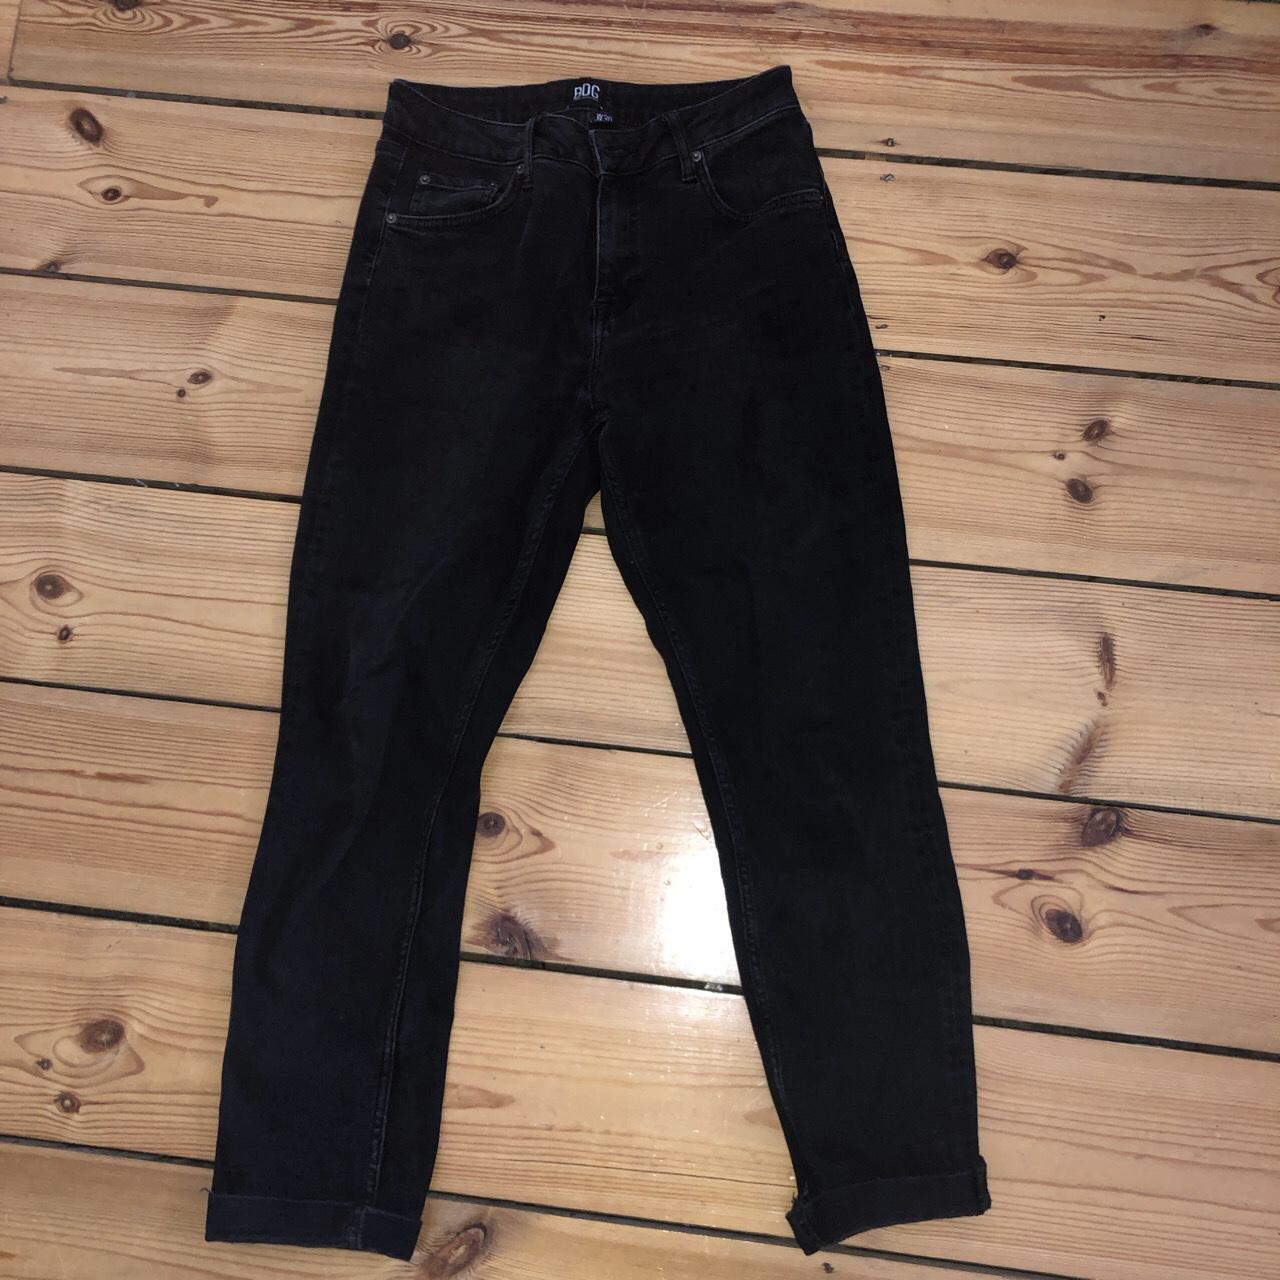 Black BDG mid rise jeans from Urban Outfitters, worn... - Depop